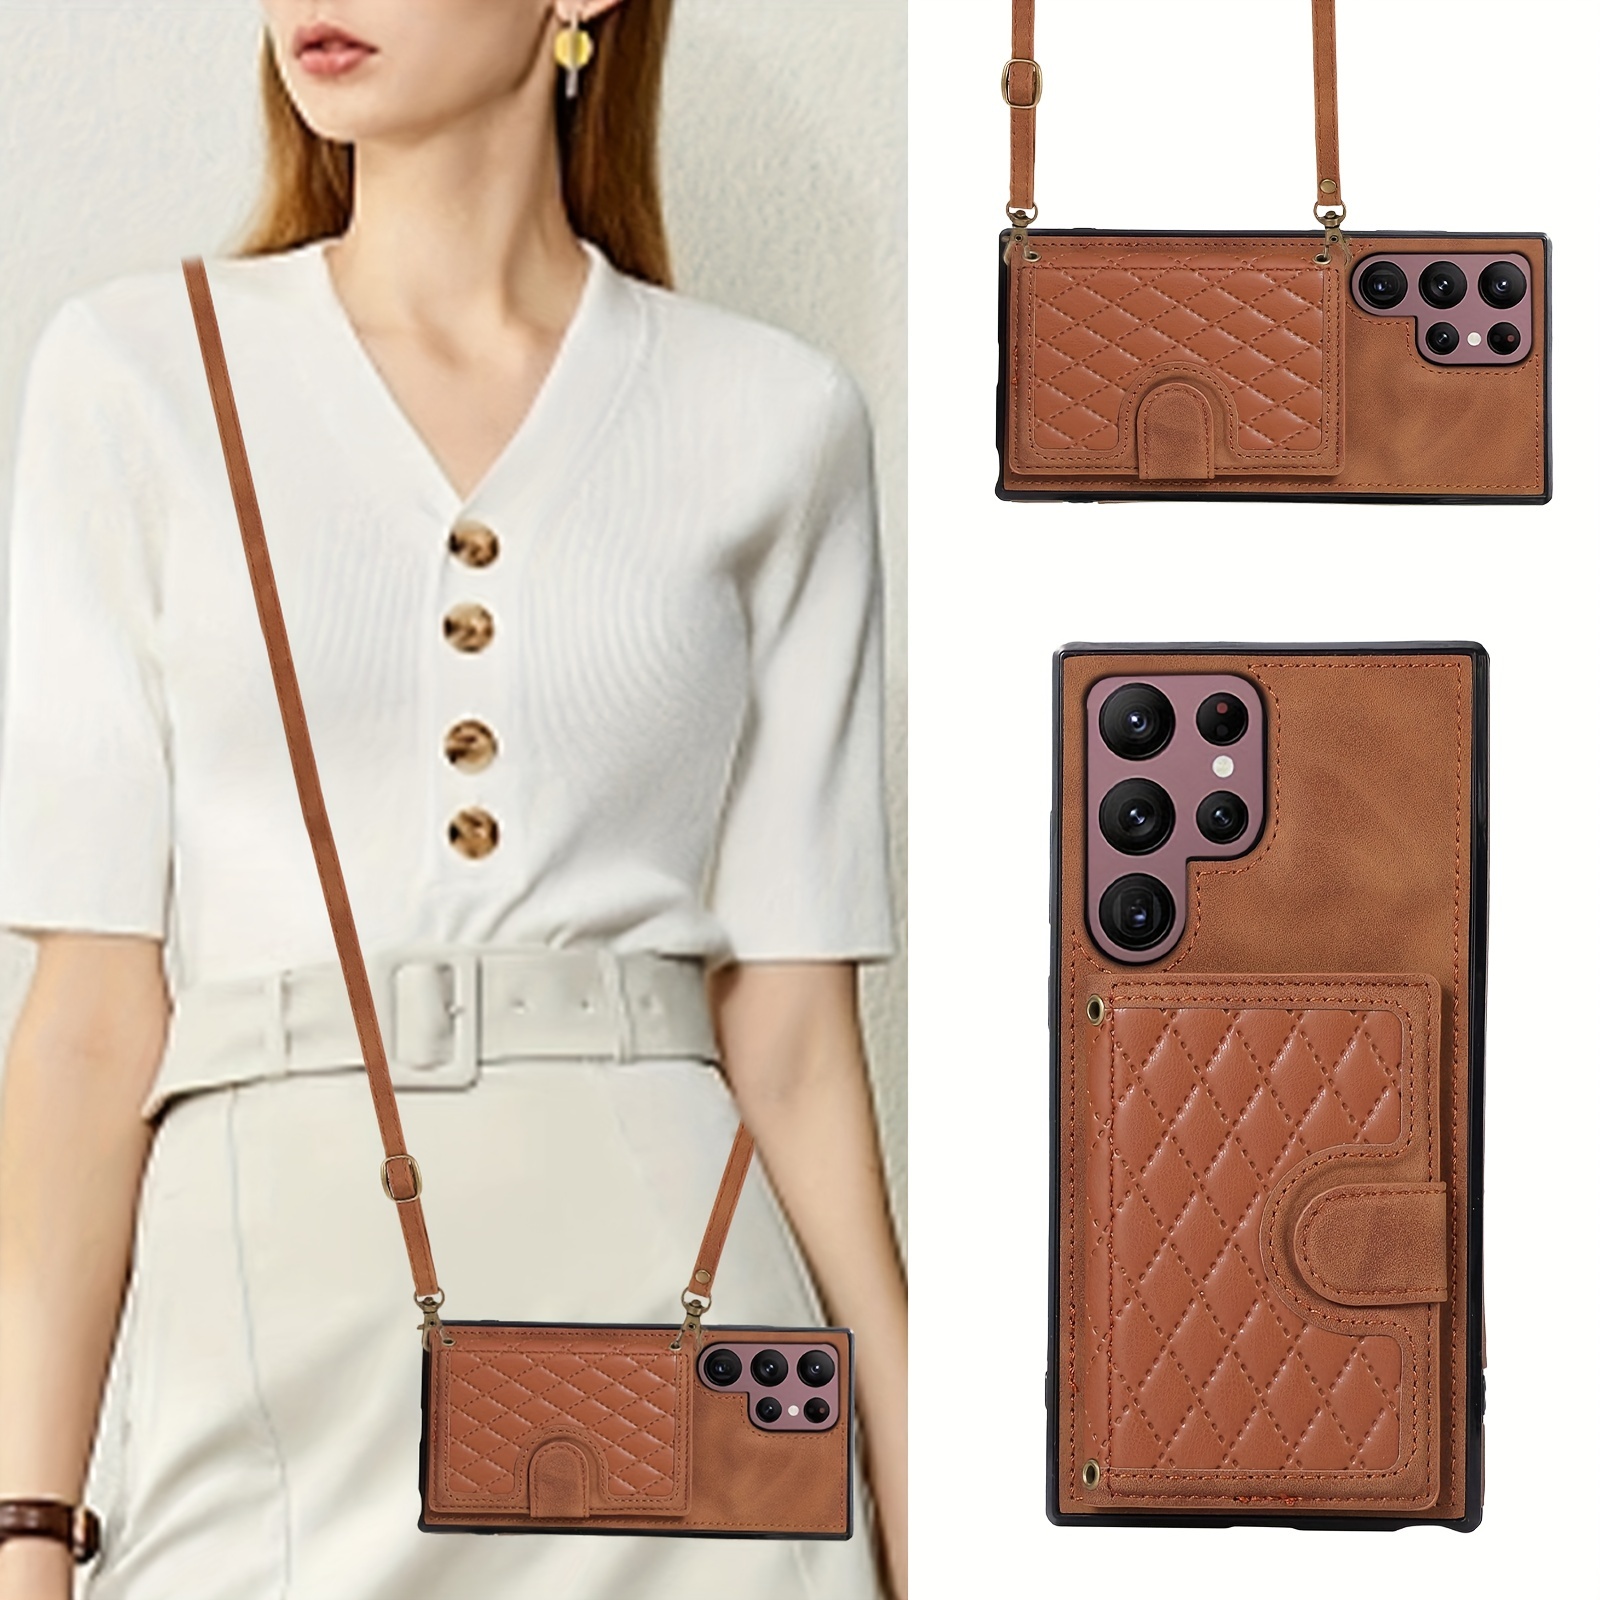 Lattice Brown Leather Sheath Phone Case For S23 S22 S21 Ultra S23 S22 S21  S20 Plus S23 S22 S21 S20 A52 A71 A72 A22 A32 A21s S20 Fe S10 Plus Note 10